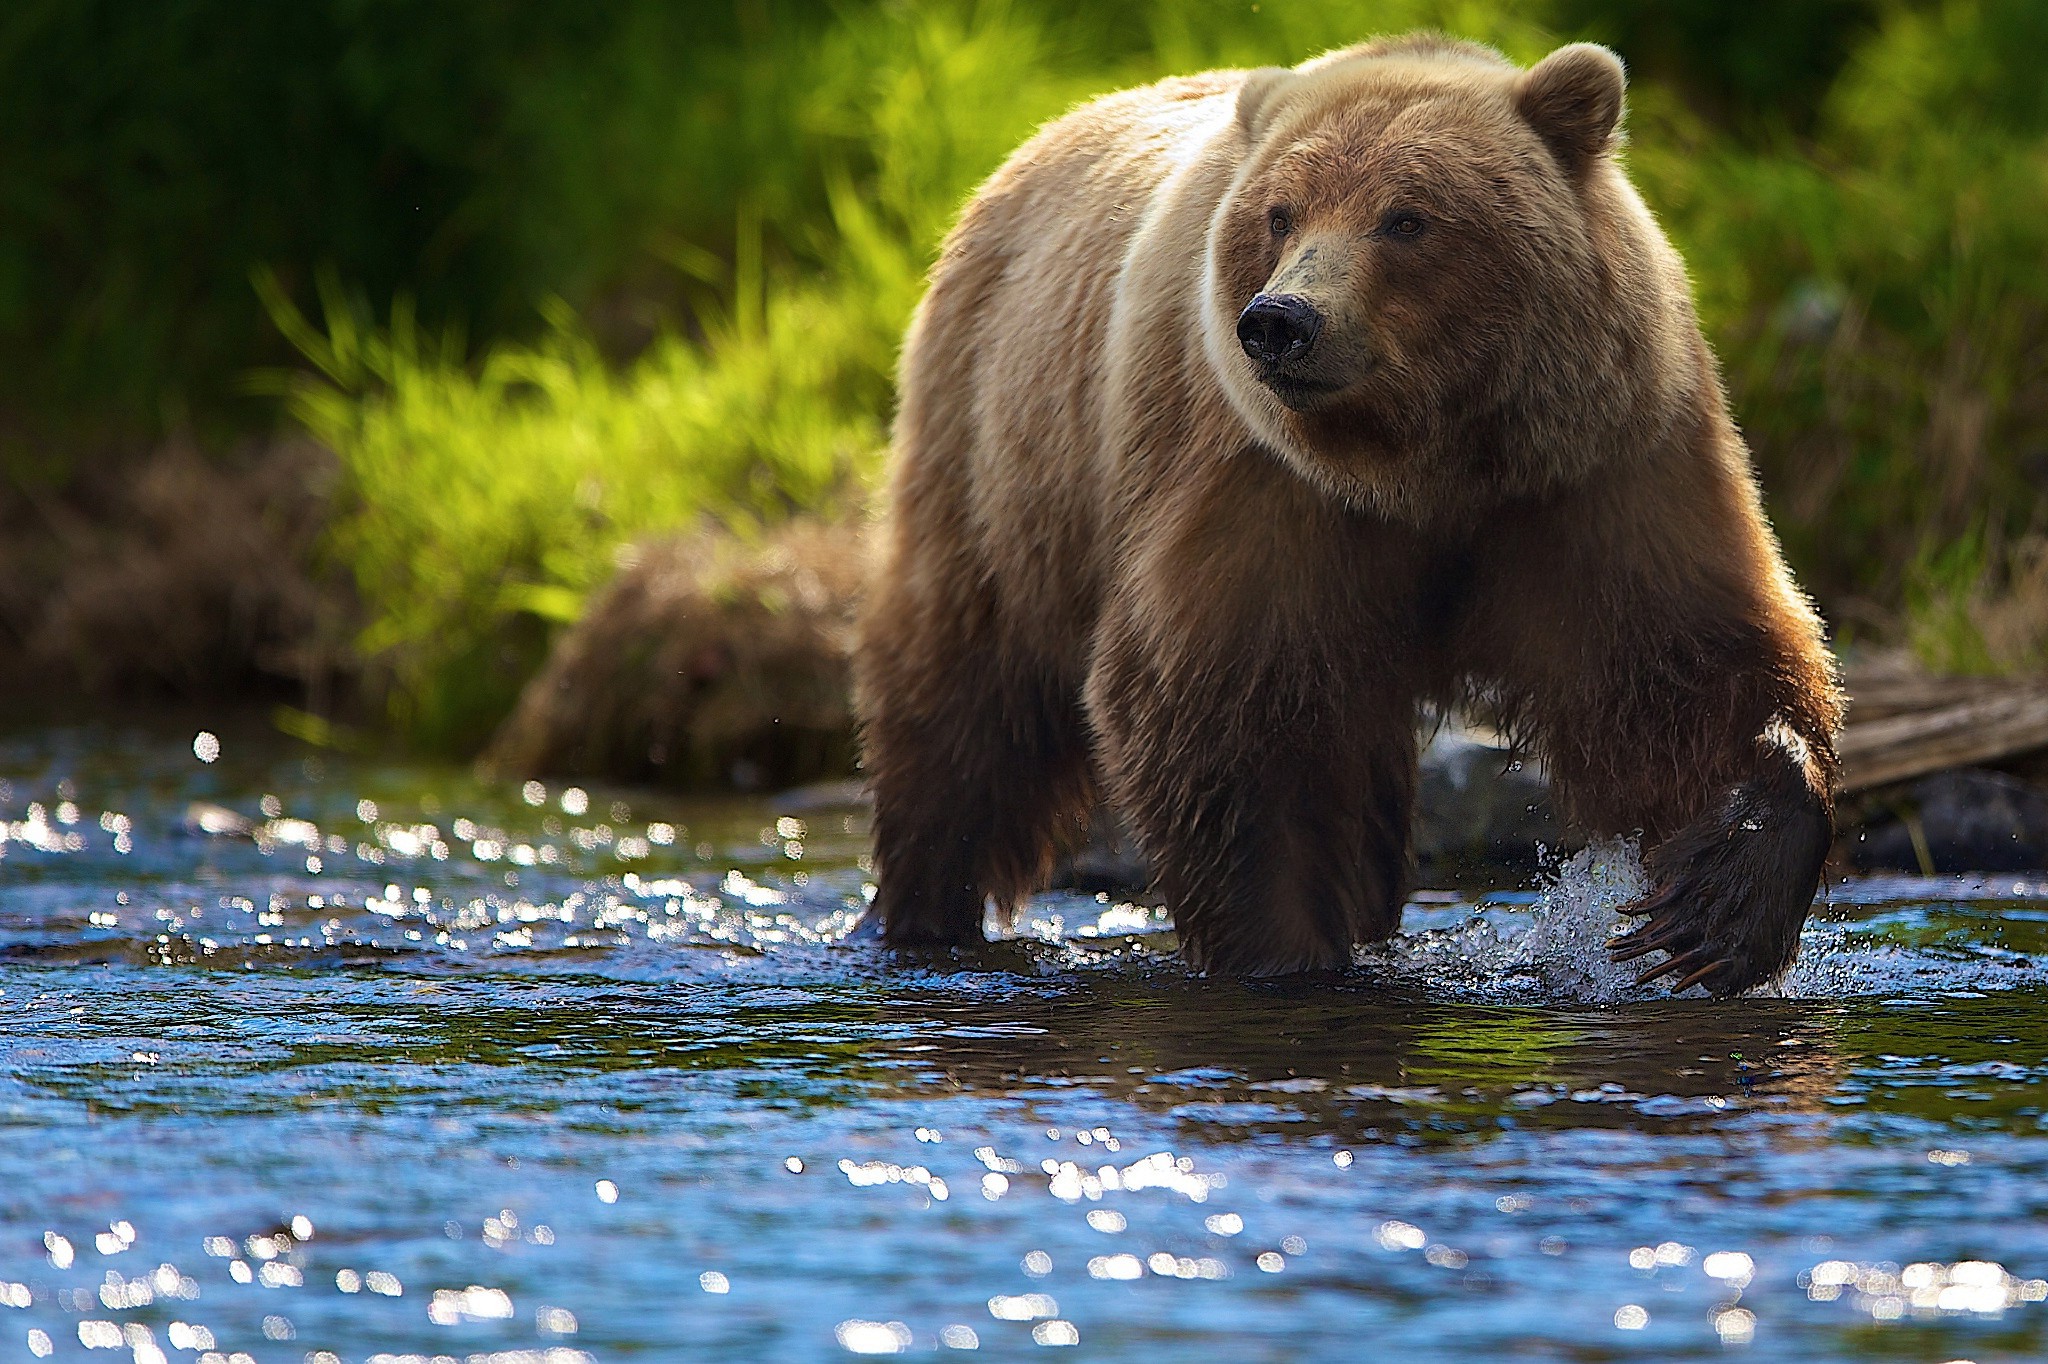  animals  Bears River Wallpapers  HD Desktop and Mobile 